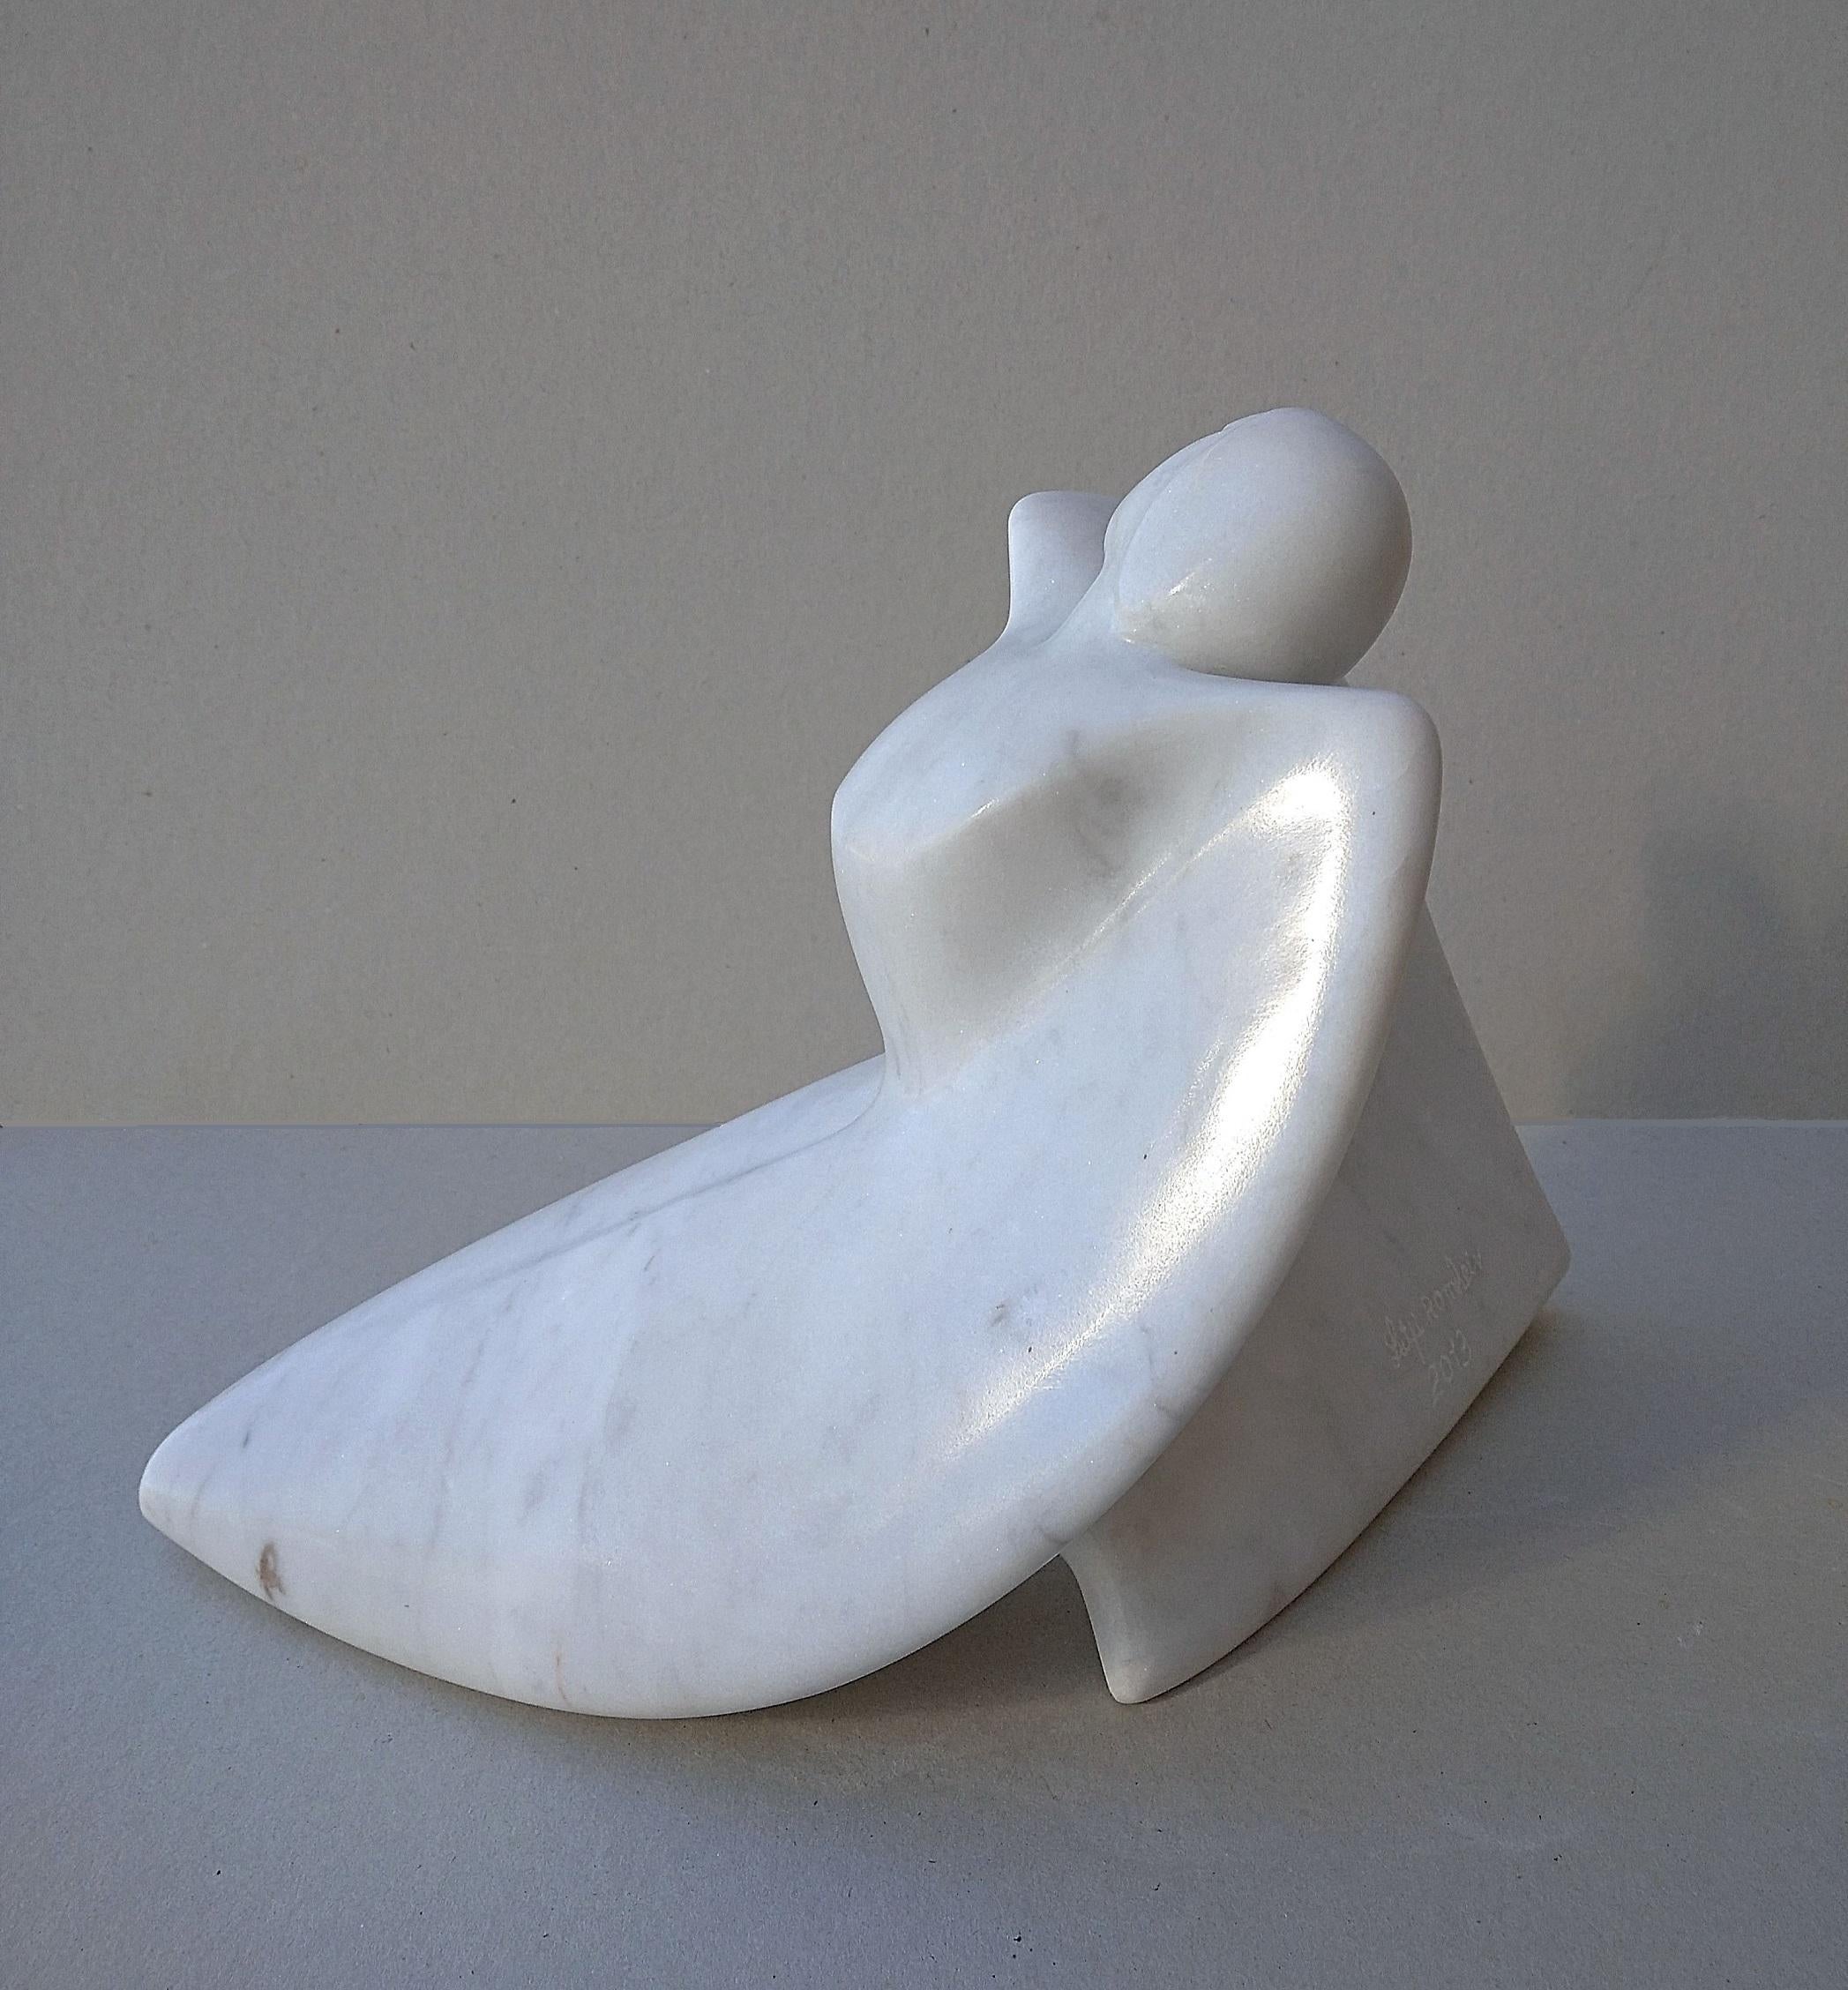 This figurative sculpture by Lutfi Romhein is in white Carrara statuary marble slightly veined in grey . Under purified lines full of softness and femininity, the body of a winged woman opens with delicacy.  The polished and waxed marble give this